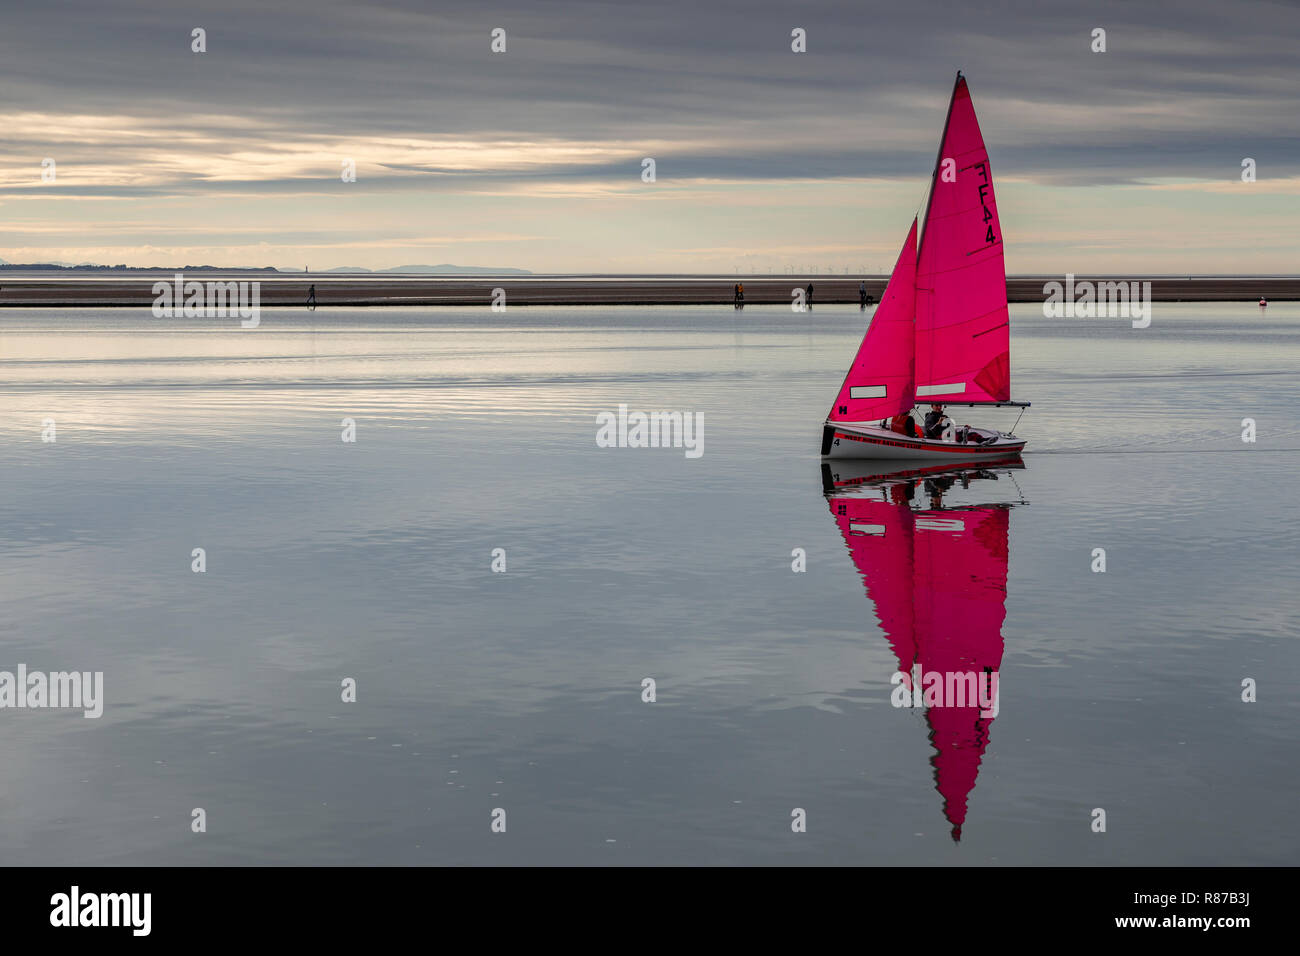 Dinghy sailing on the Marine Lake at West Kirby, Wirral, England Stock Photo